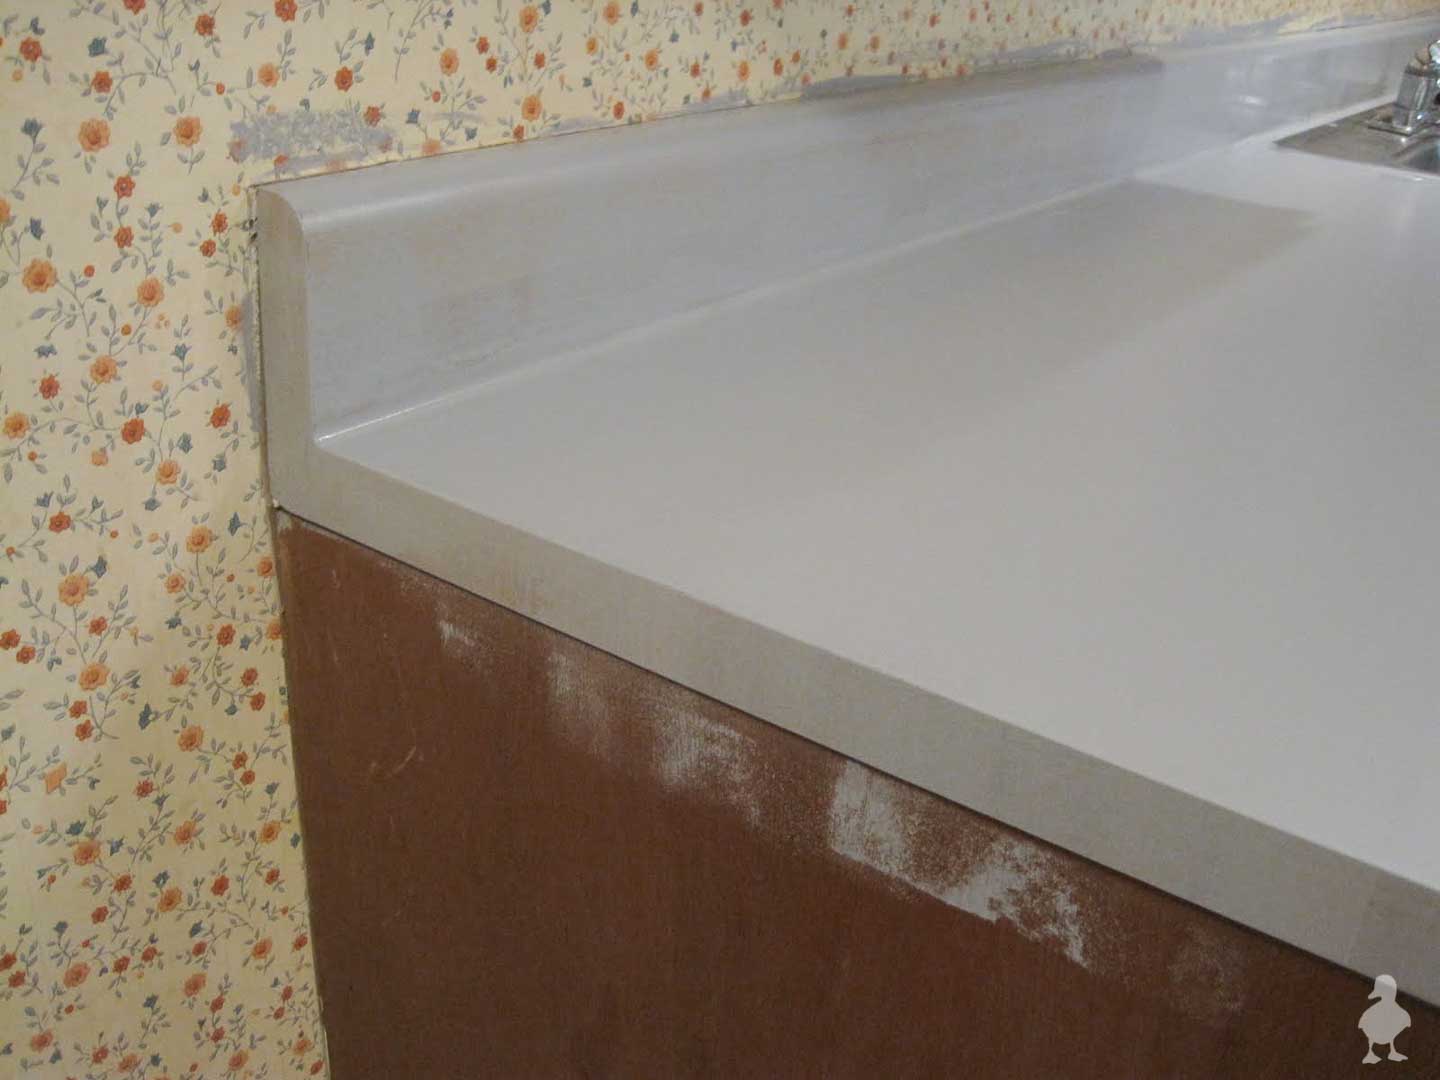 Use Epoxy To Coat Existing Countertops To Make Them Look Like Real Stone